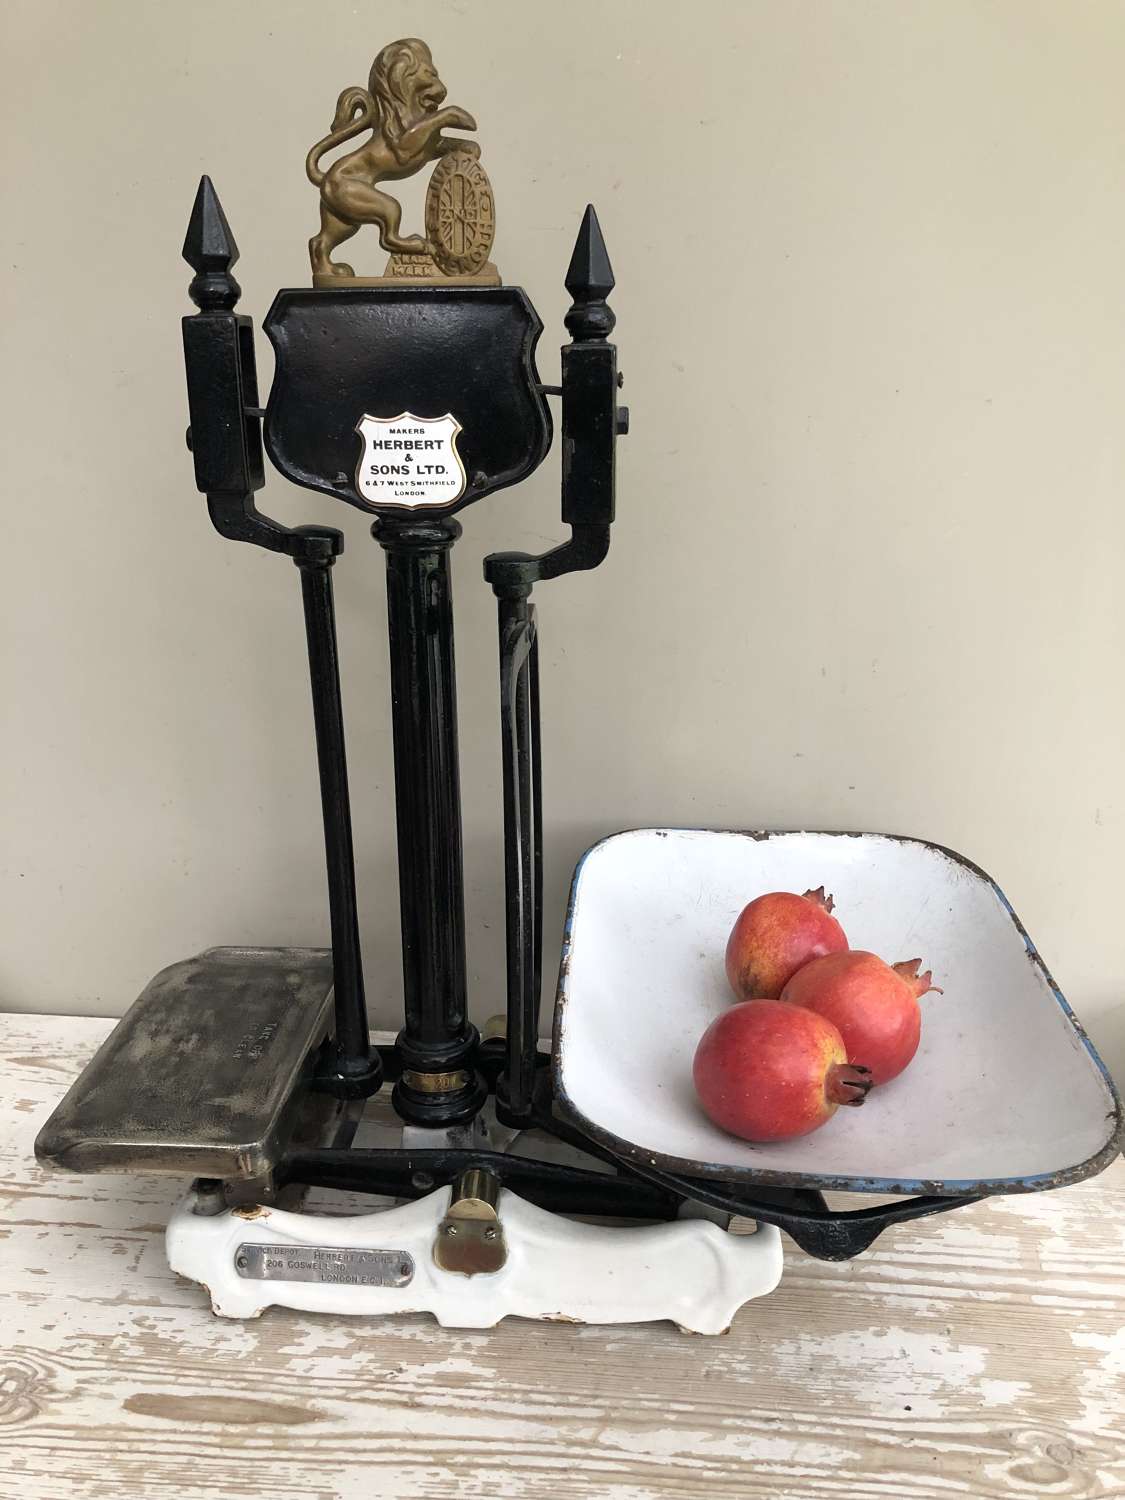 Edwardian Grocer's Scales